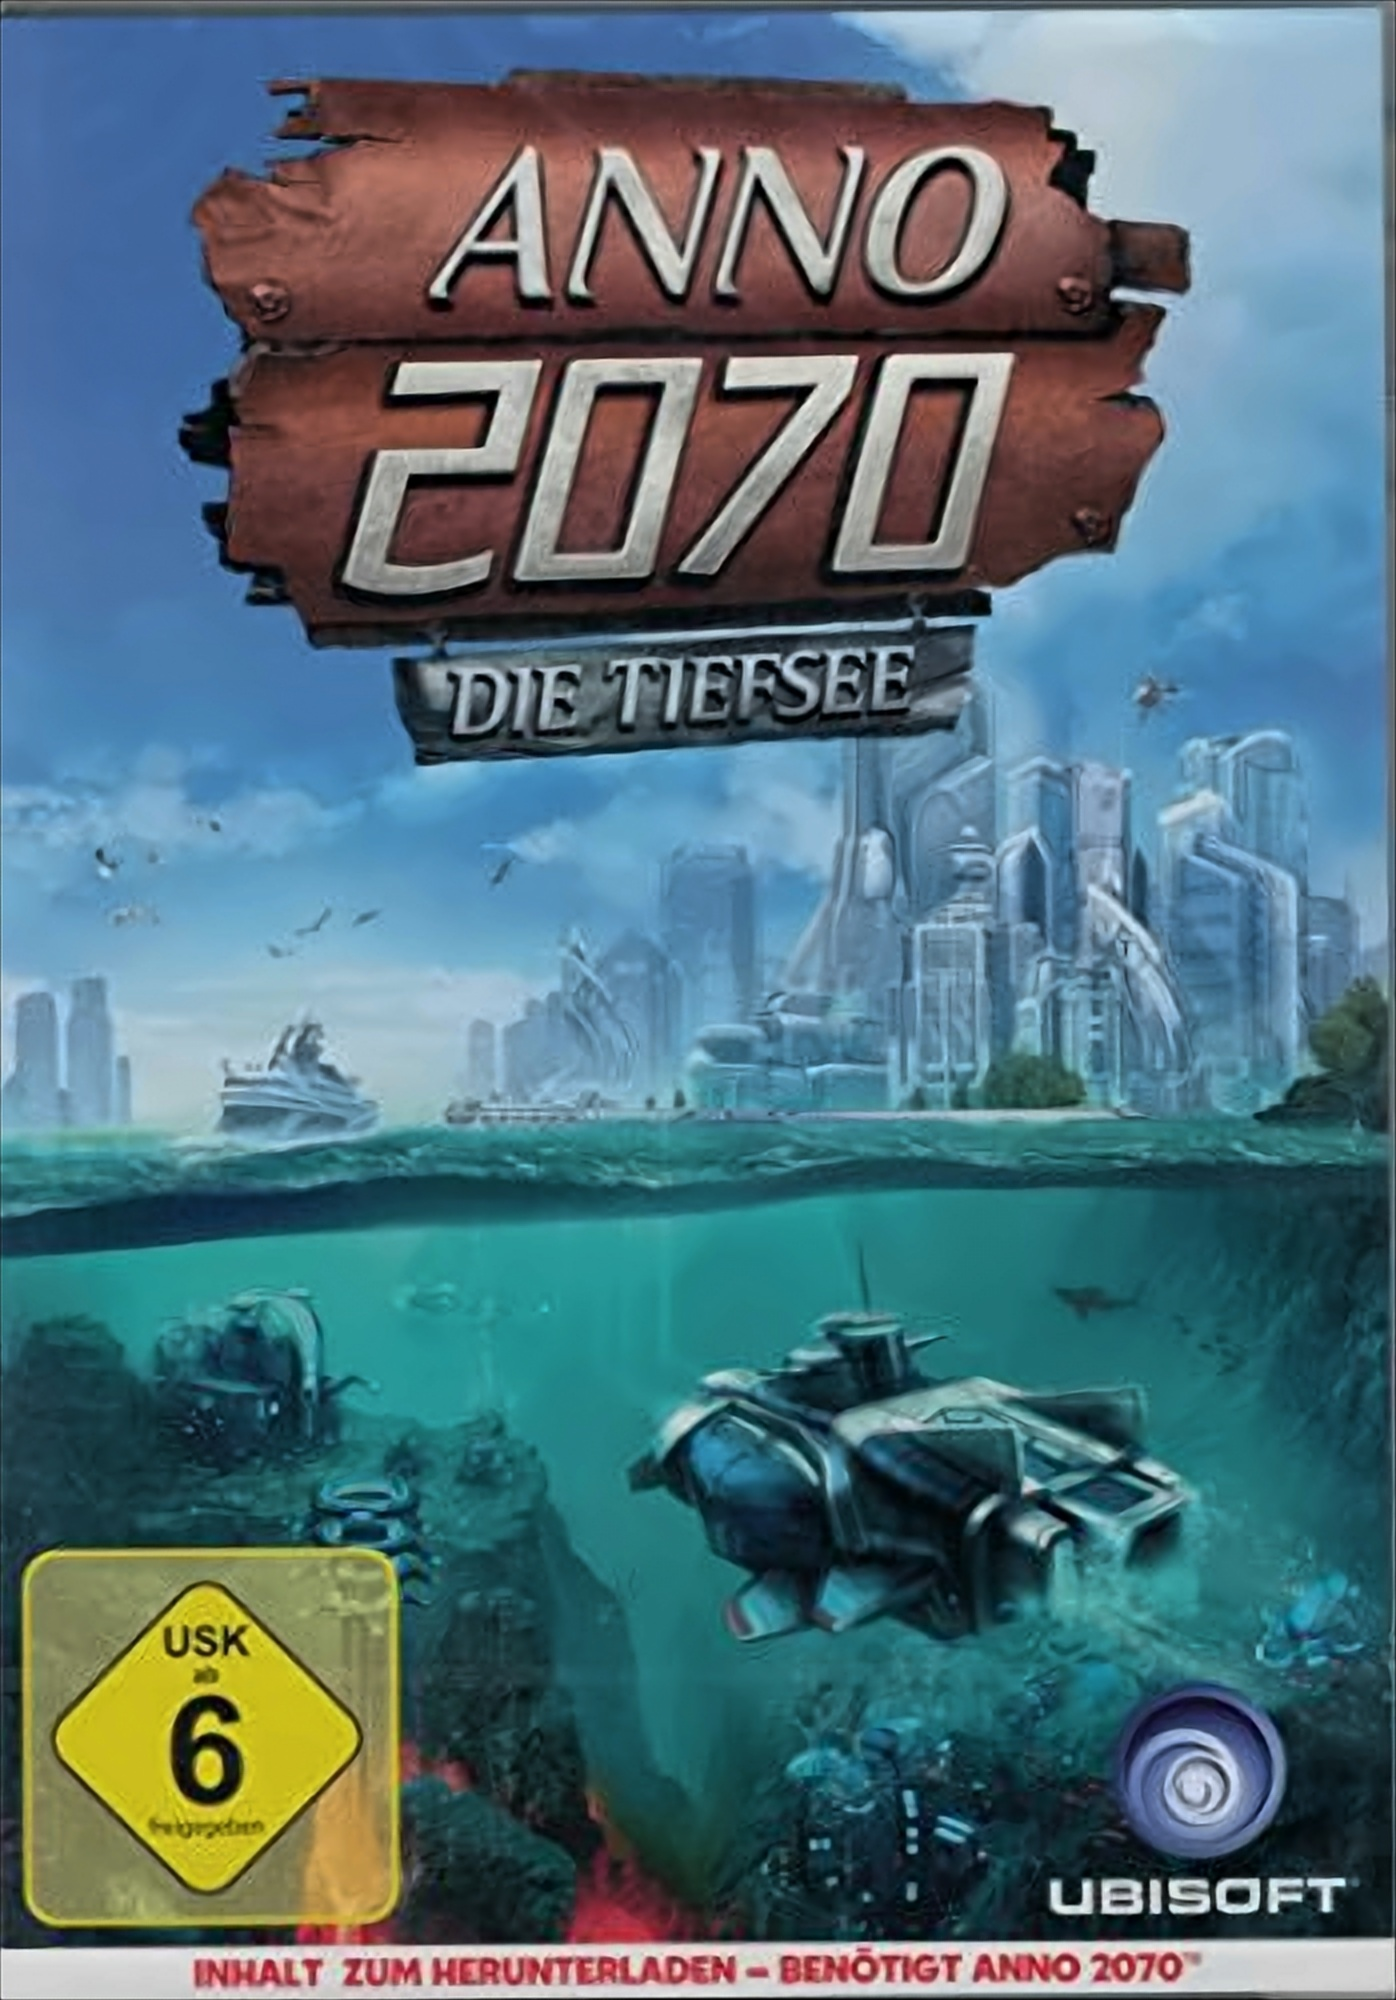 ANNO 2070 - Die - [PC] Tiefsee (DLC only) (Add-on)